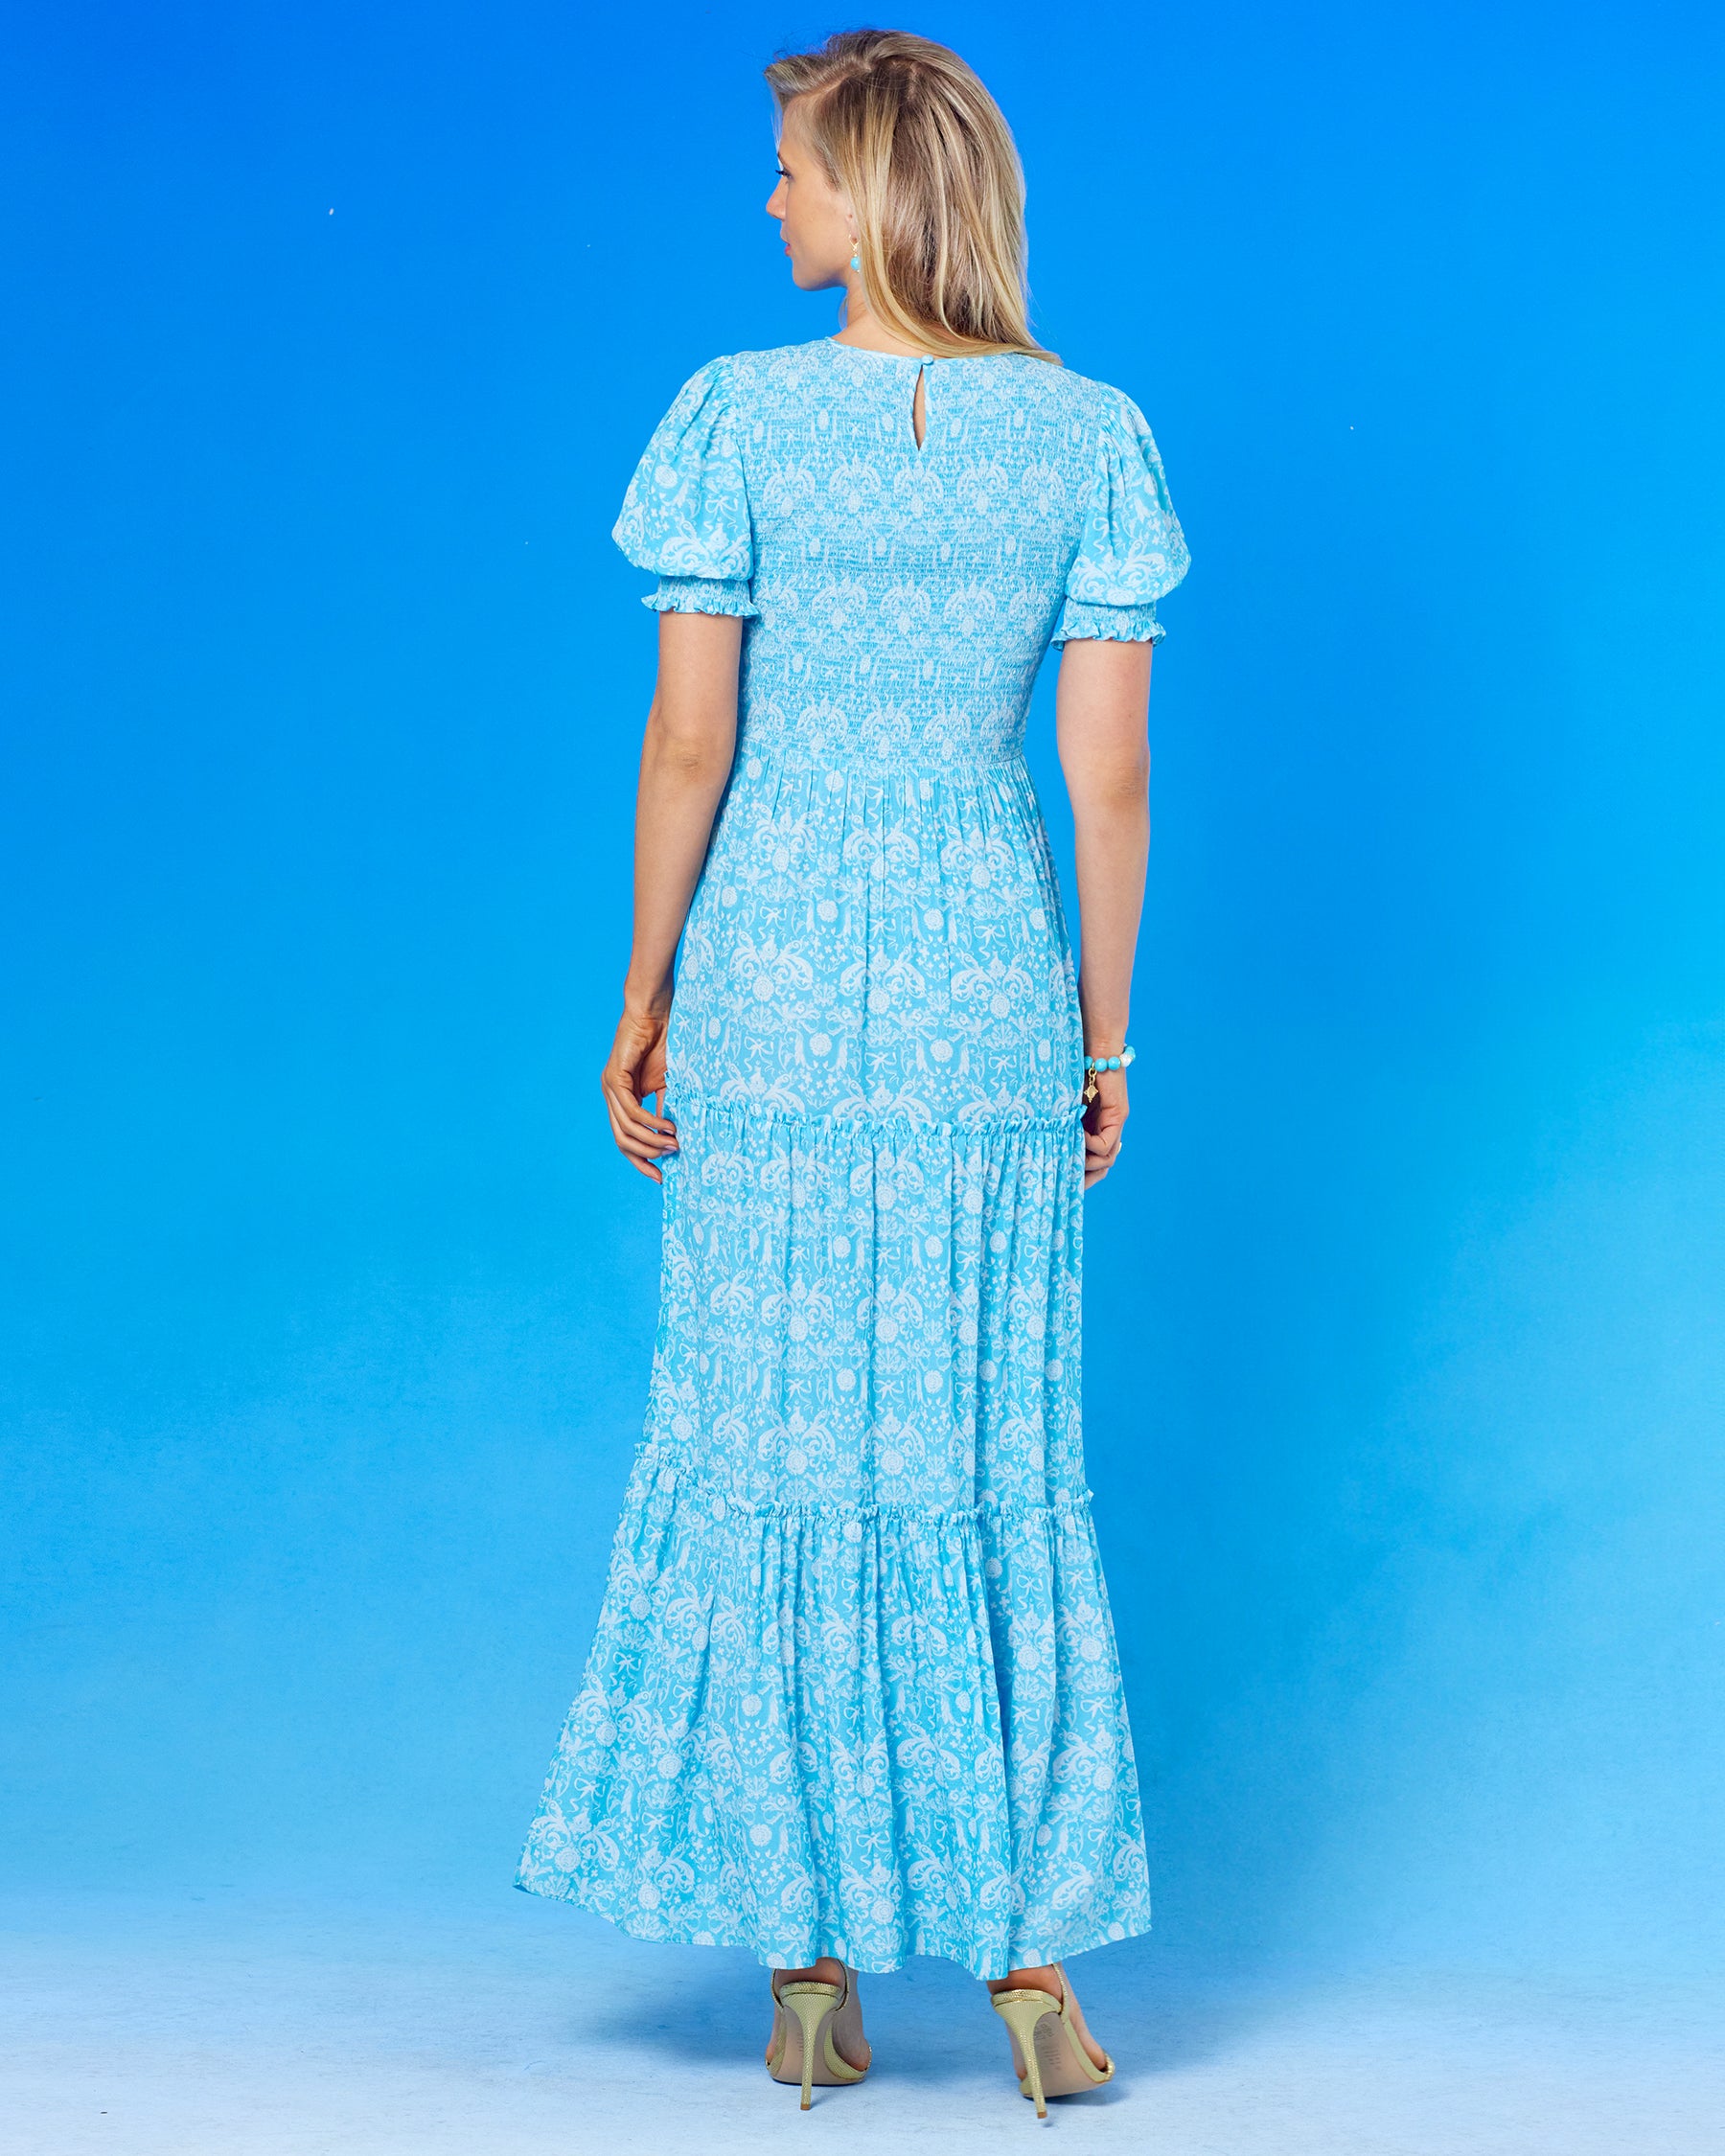 Kitty Puff Sleeve Maxi Dress in Regency Porcelain Ribbons-Back view